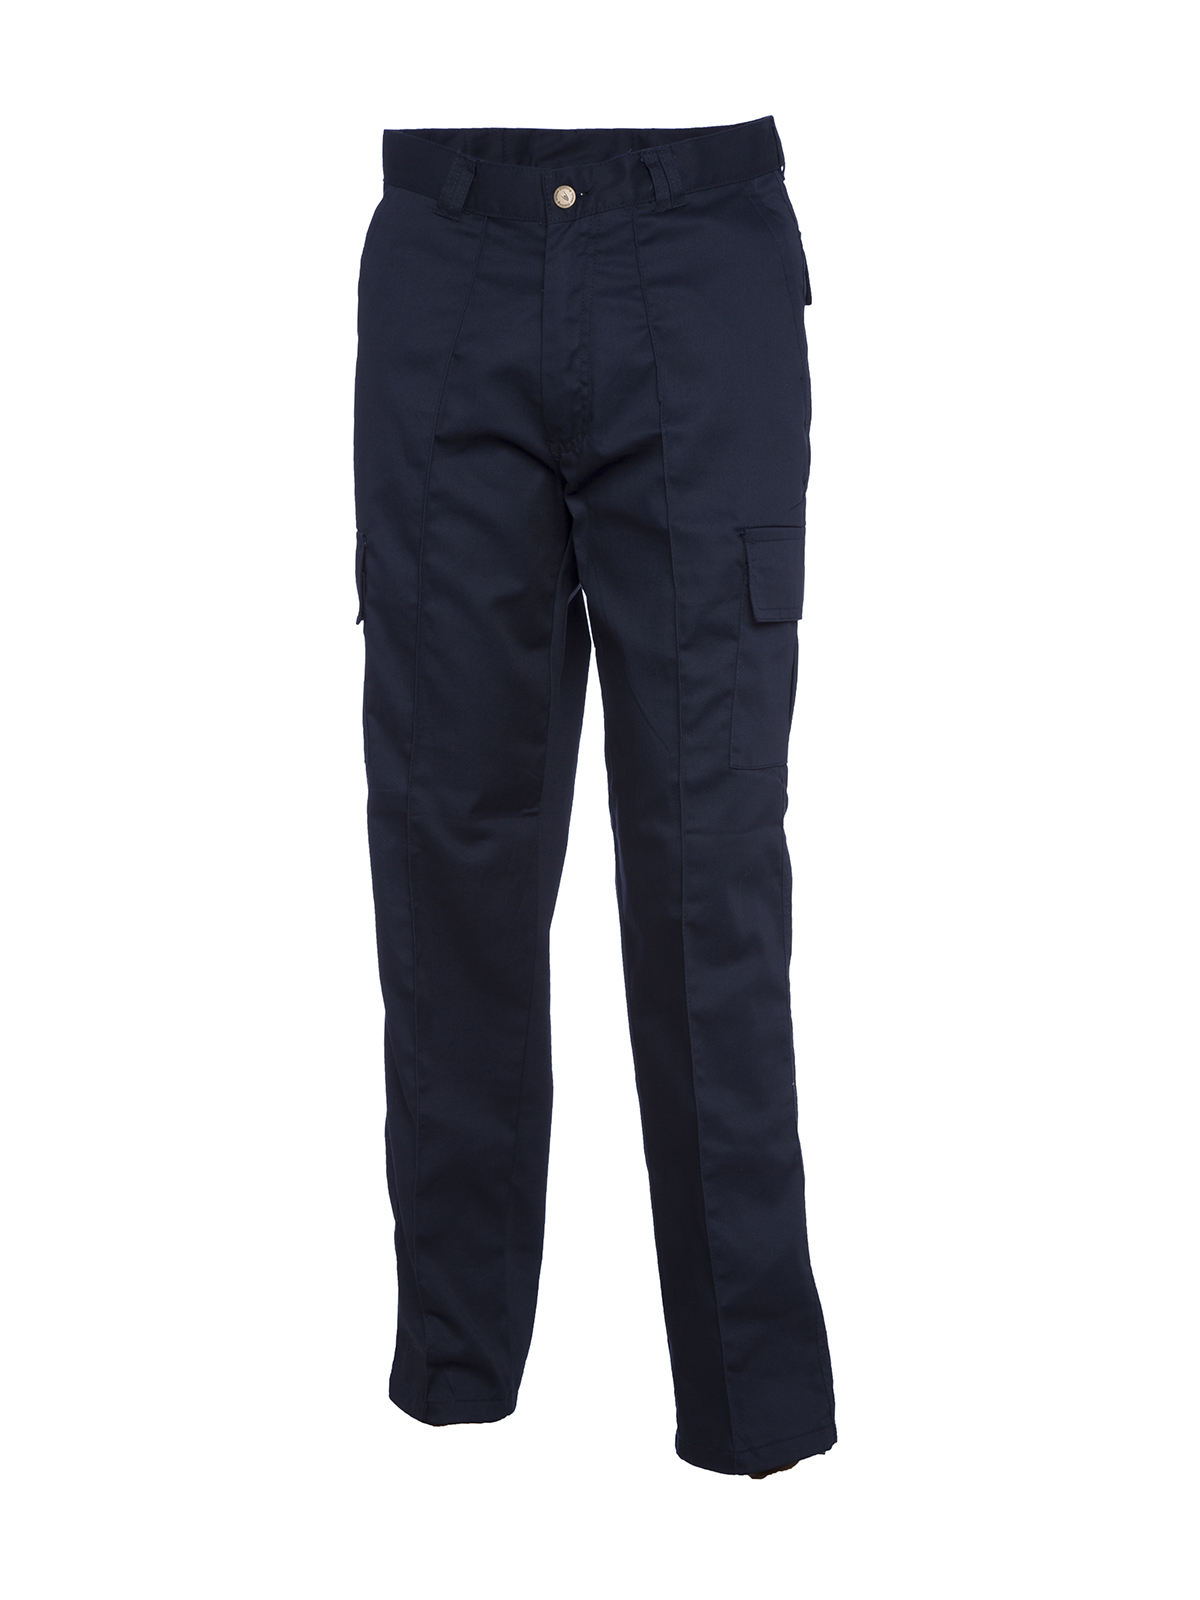 Cargo Trousers, Navy Blue - 48L